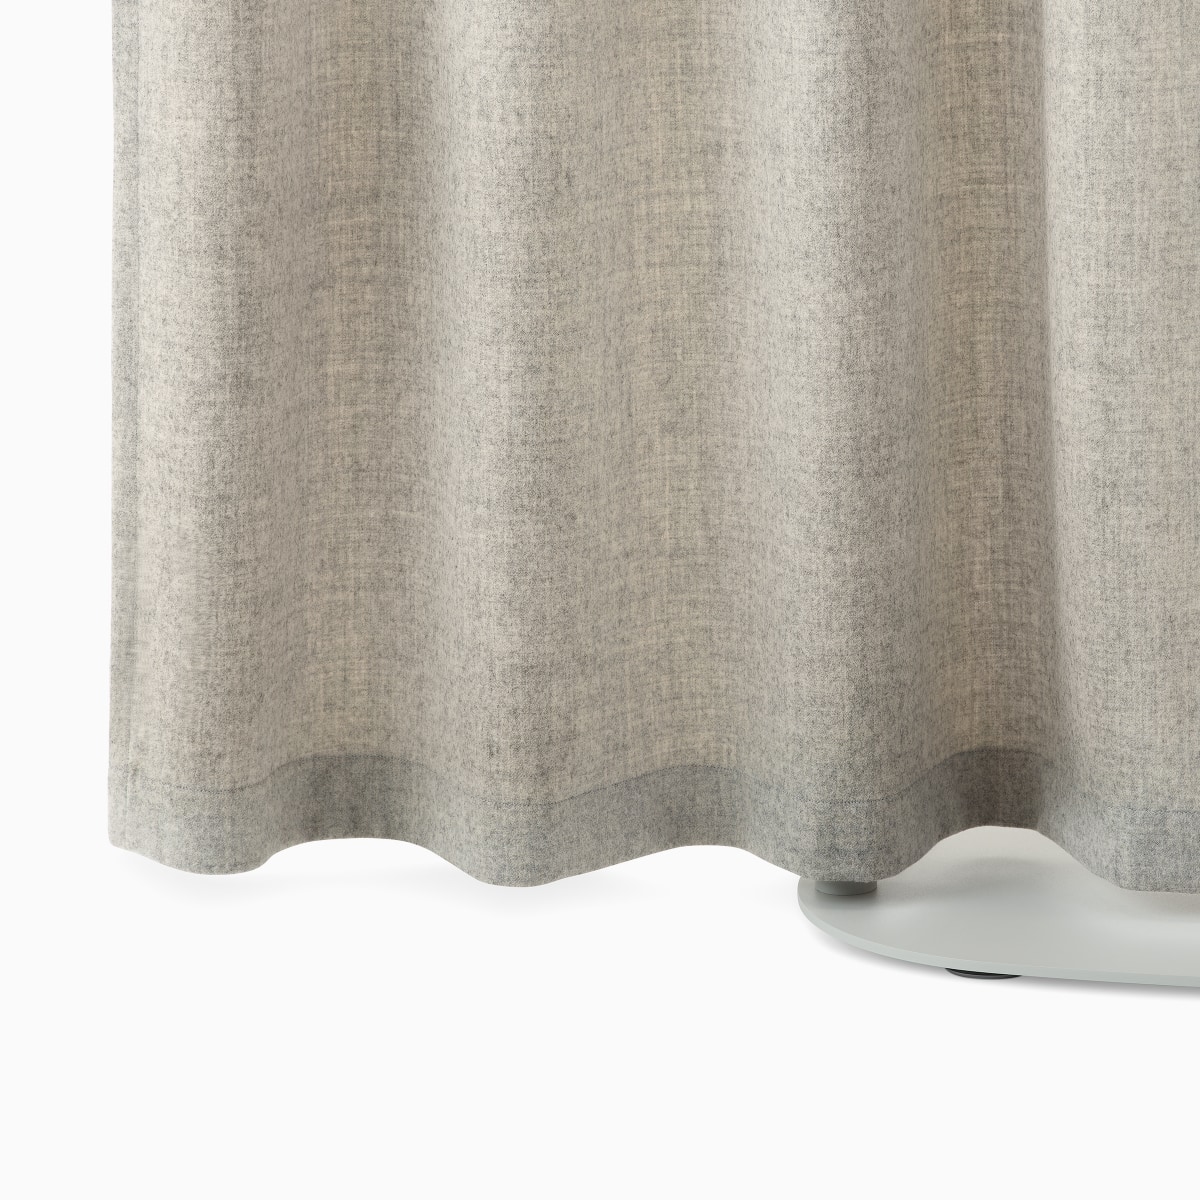 Detail of a light brown OE1 Freestanding Curtain with a grey base.